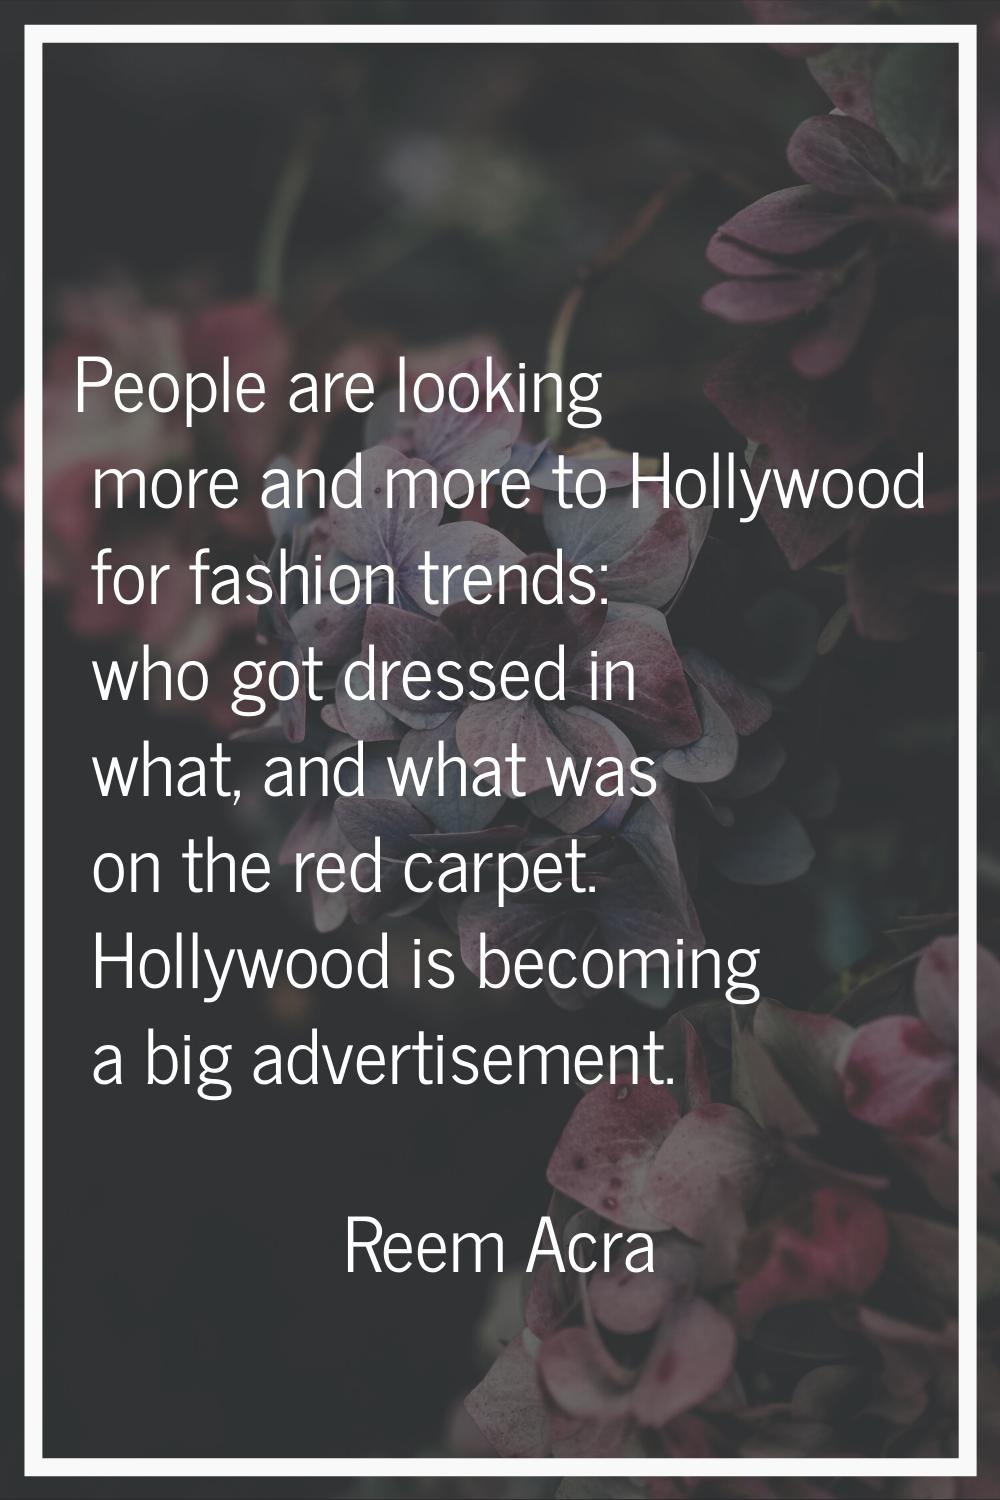 People are looking more and more to Hollywood for fashion trends: who got dressed in what, and what